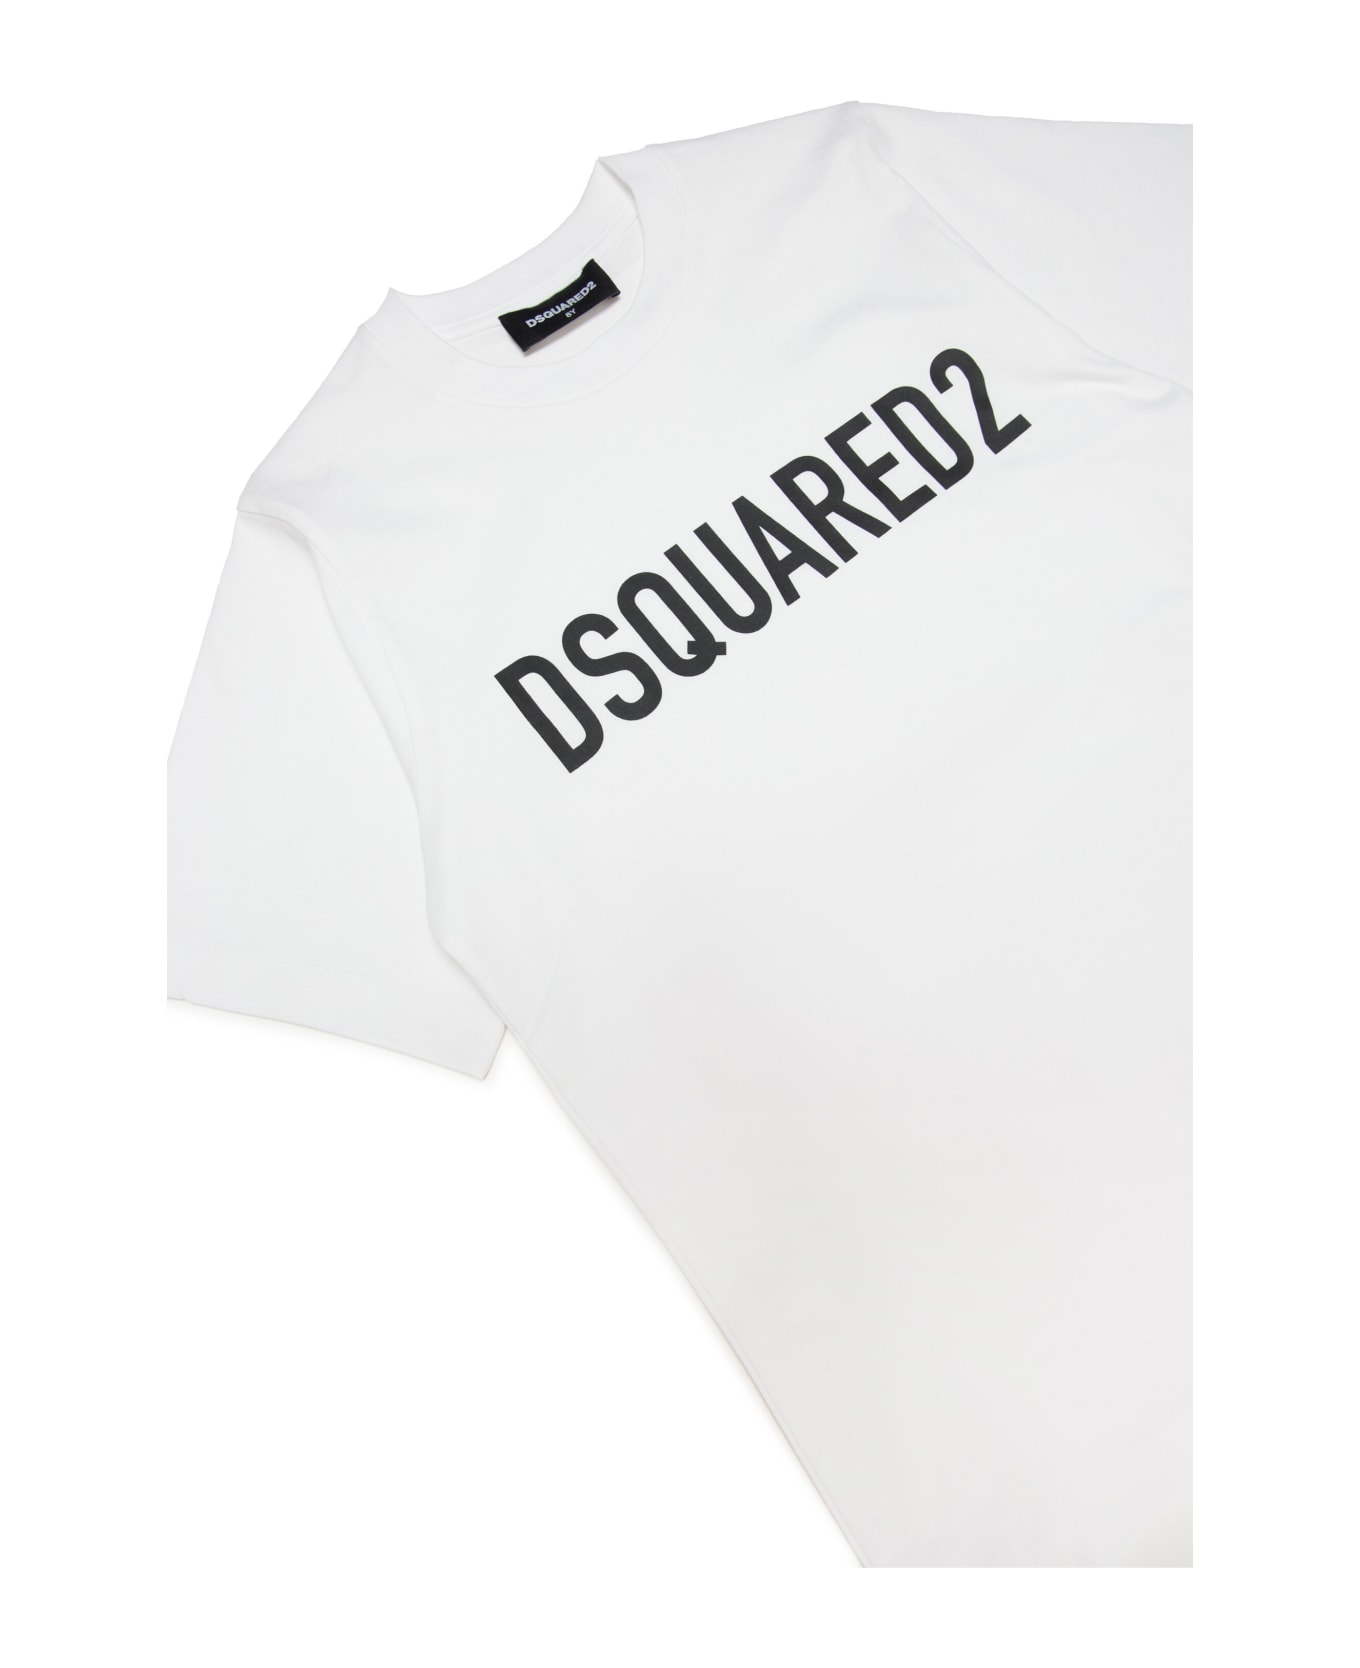 Dsquared2 D2t857u Slouch Fit-eco T-shirt Dsquared White Organic Cotton T-shirt With Logo - Bianco